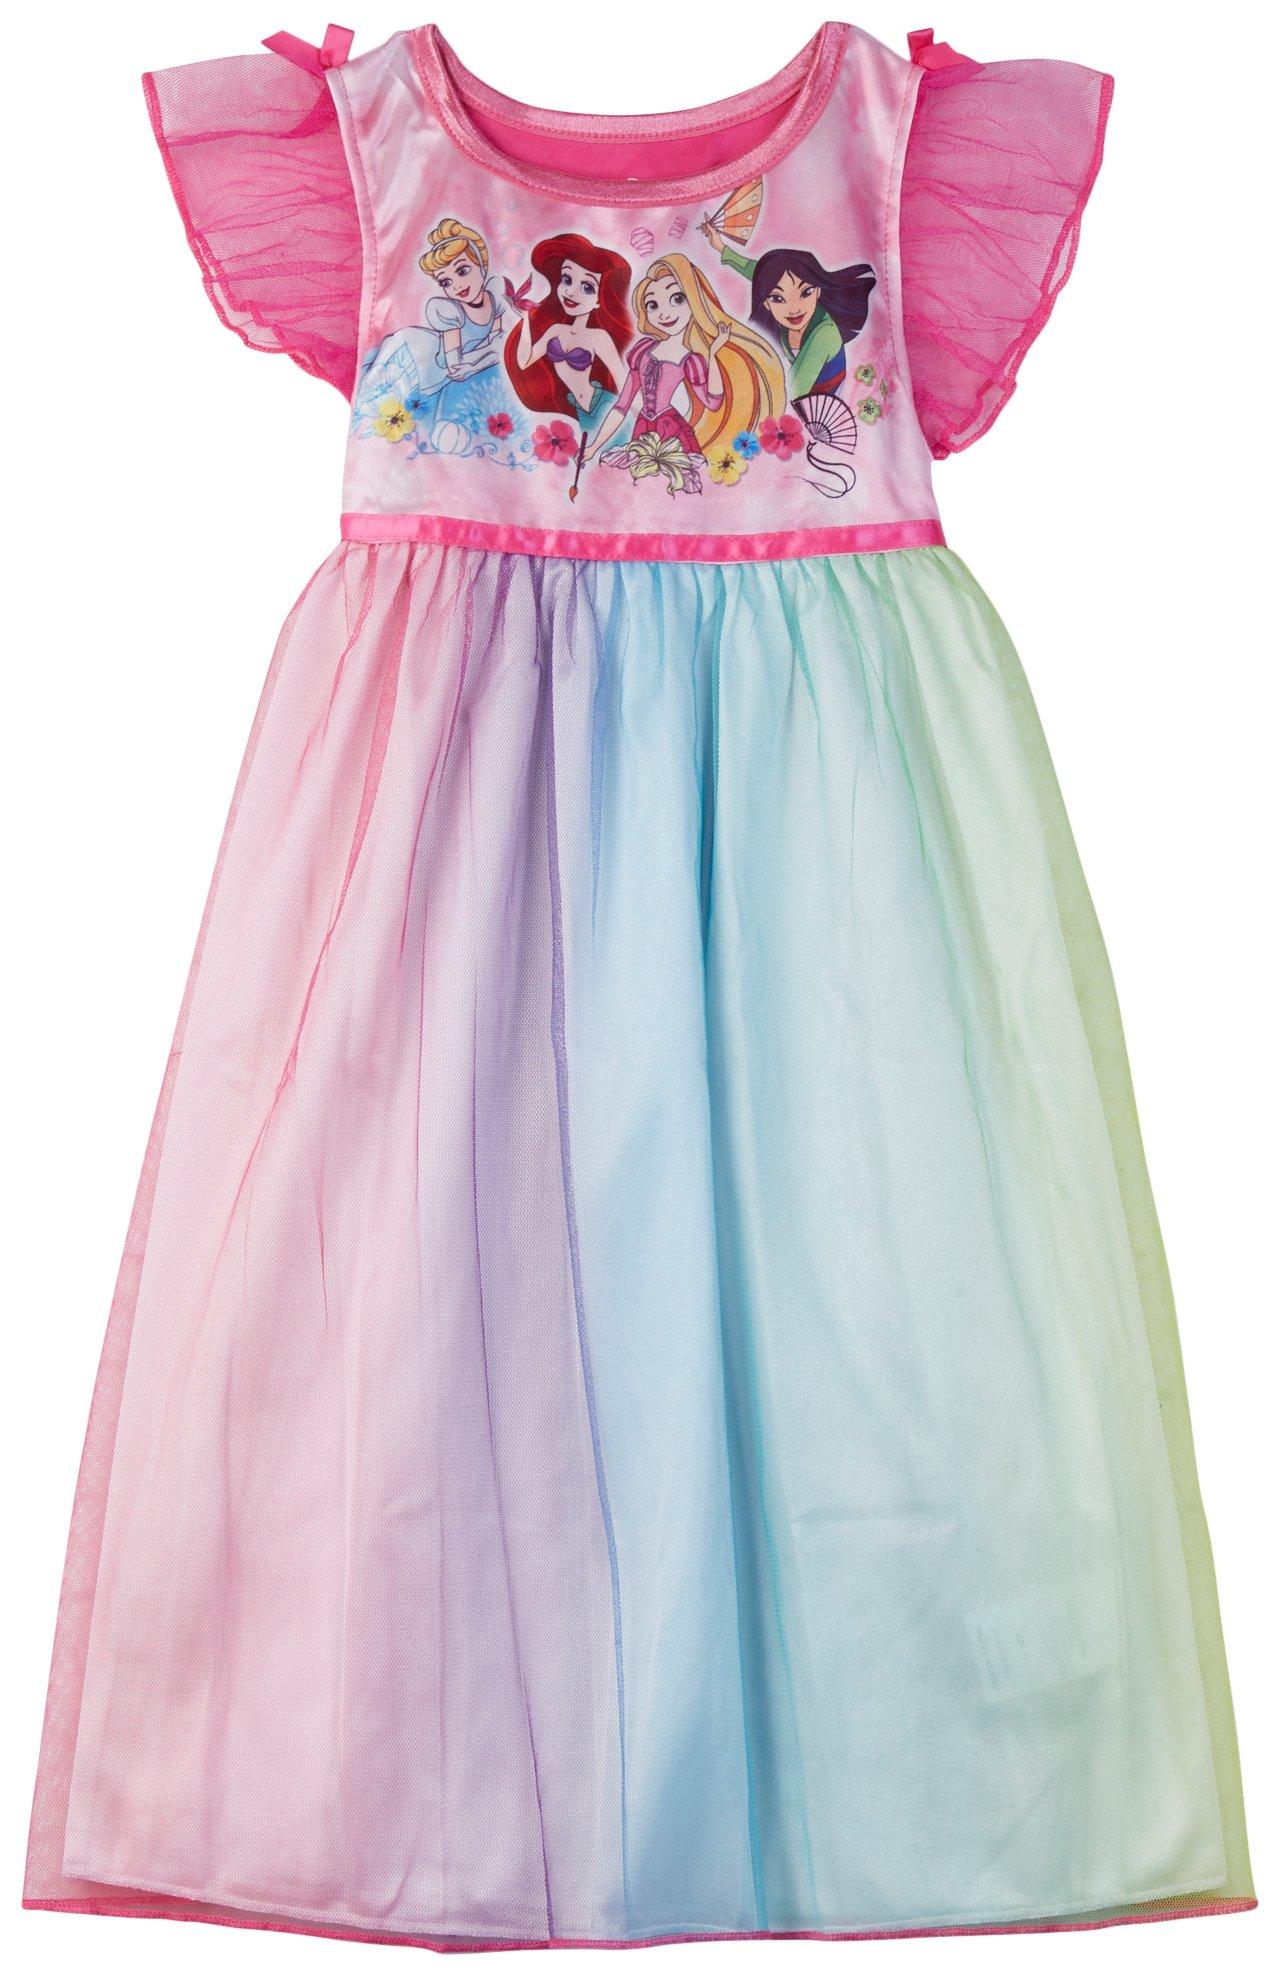 Toddler Girls Gown Party Dress